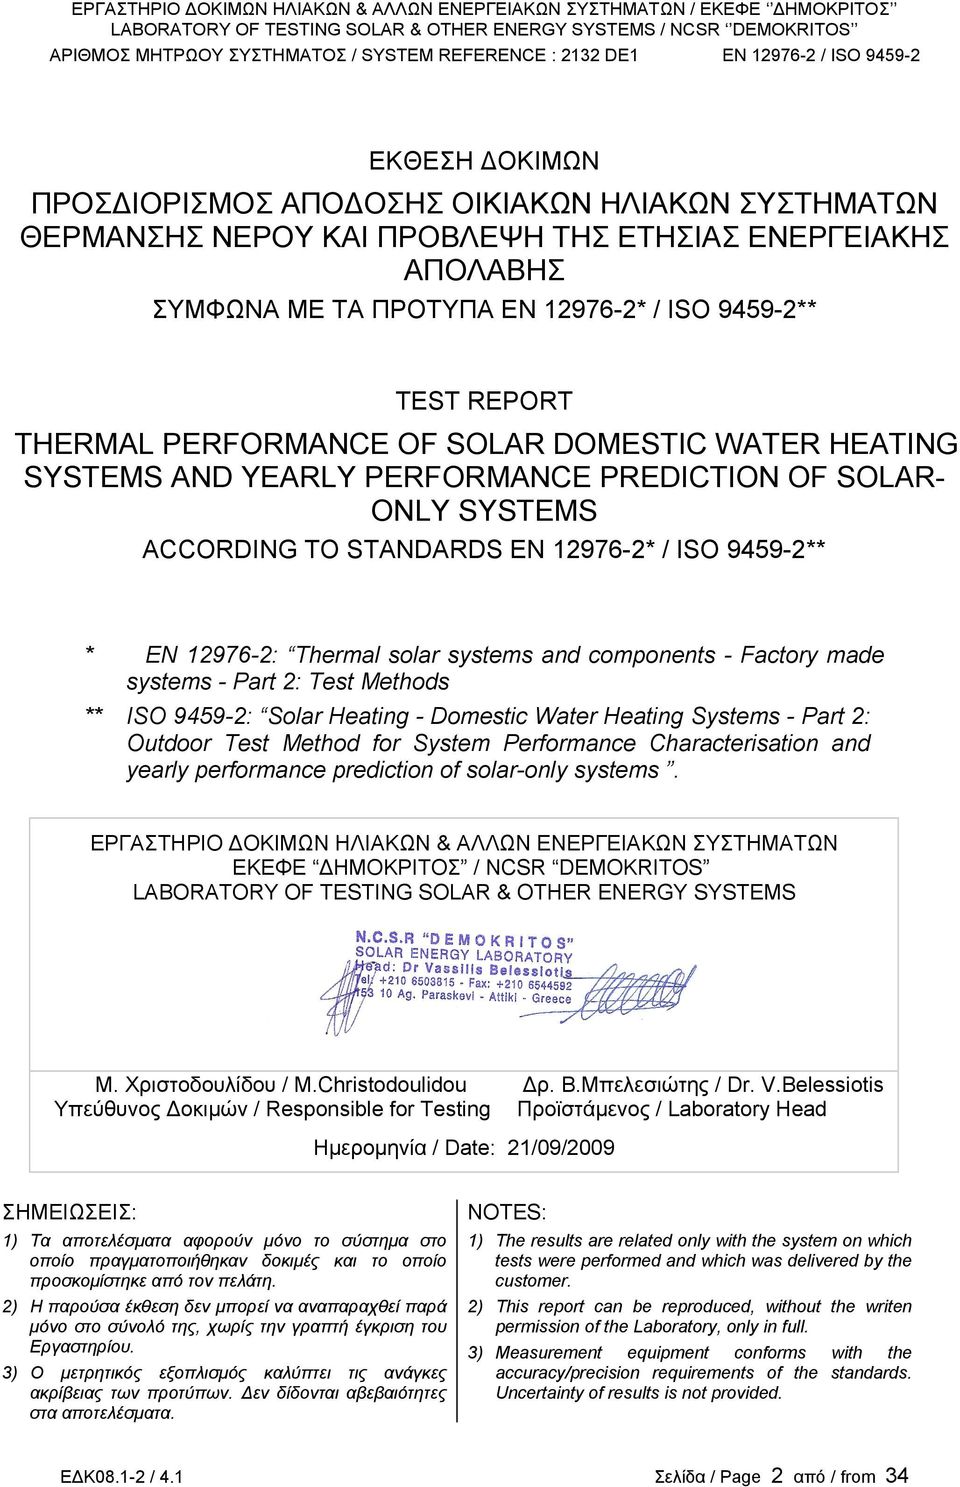 components - Factory made systems - Part 2: Test Methods ** ISO 9459-2: Solar Heating - Domestic Water Heating Systems - Part 2: Outdoor Test Method for System Performance Characterisation and yearly